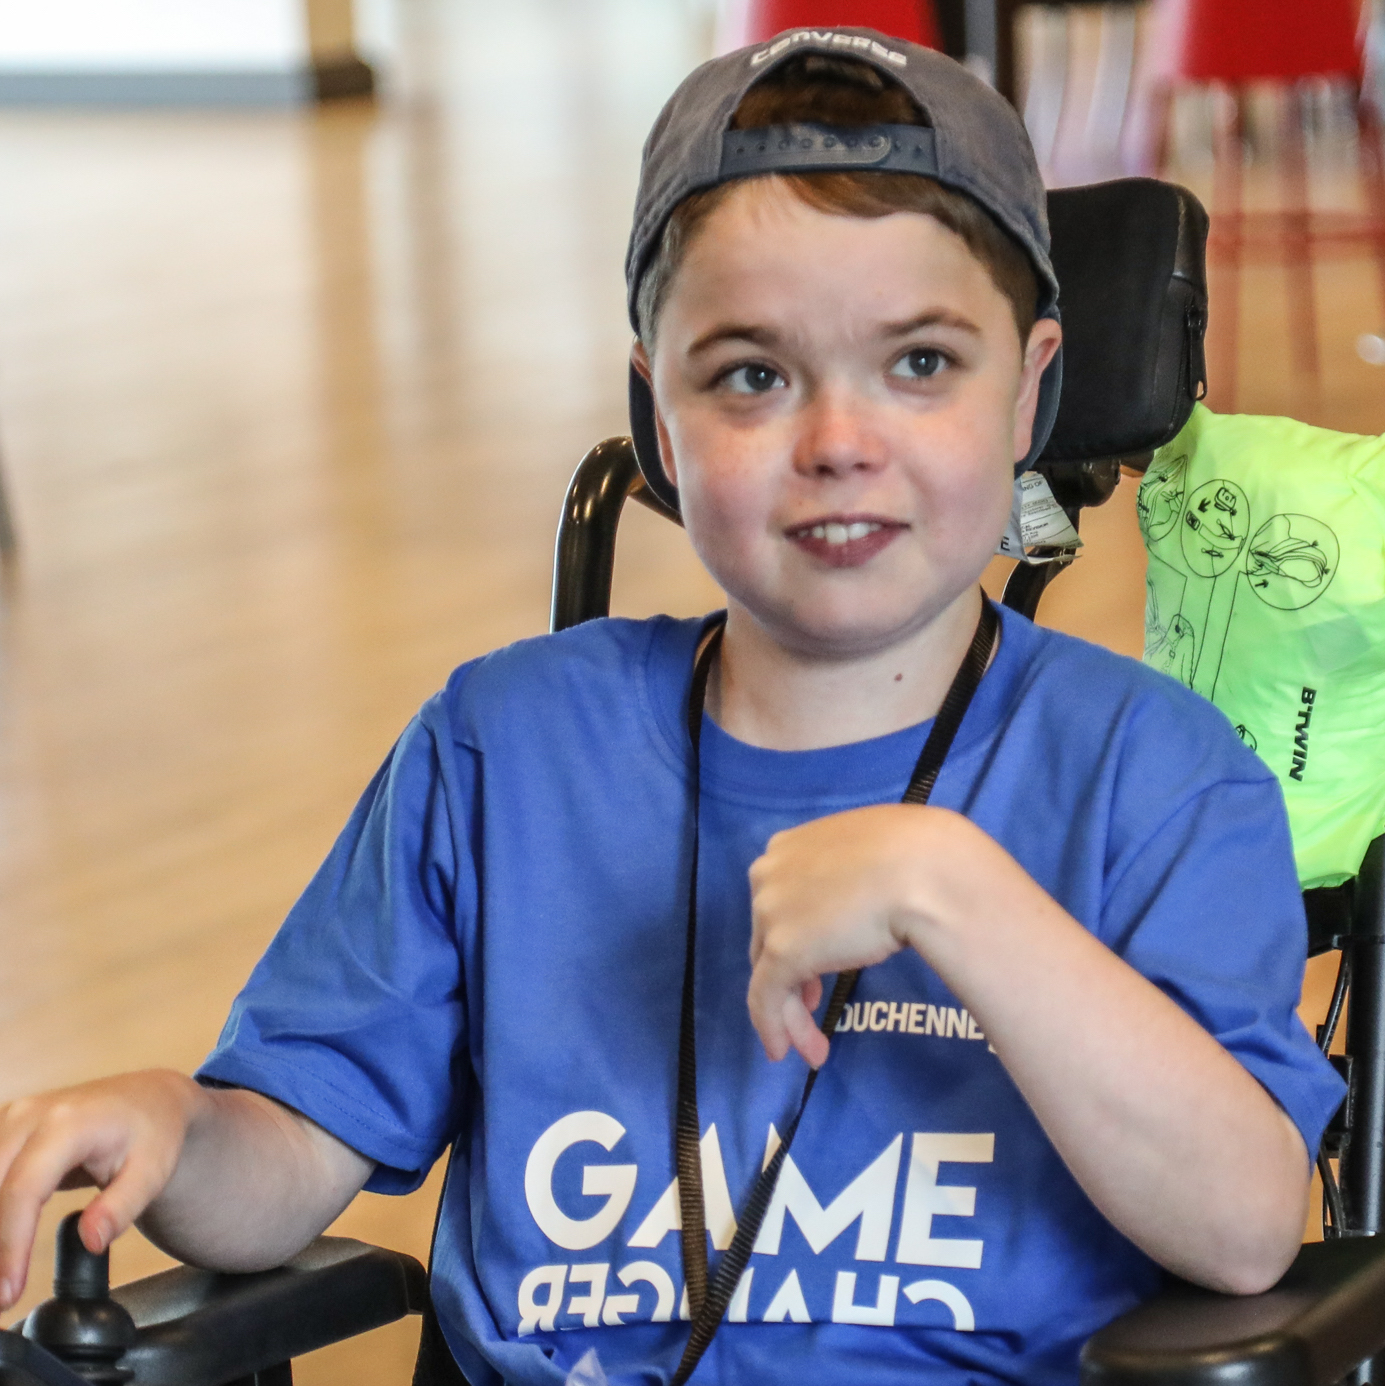 A boy with DMD taking part in a Duchenne UK gaming day